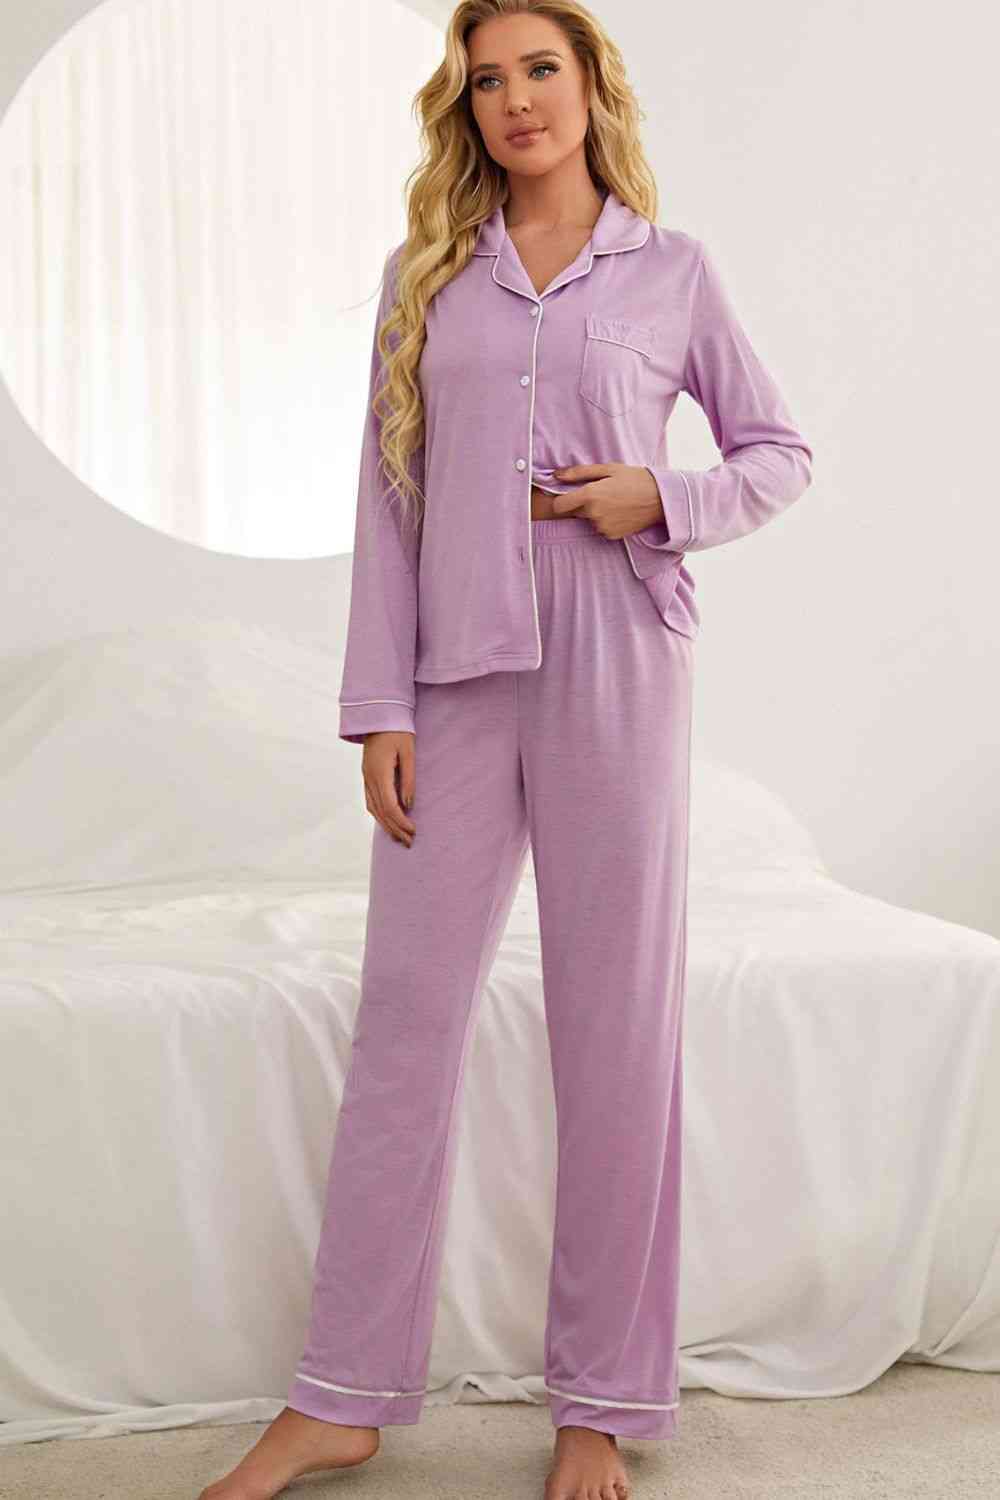 Contrast Piping Button Down Top and Pants Loungewear Set (2 Colors) Loungewear Krazy Heart Designs Boutique Purple S 